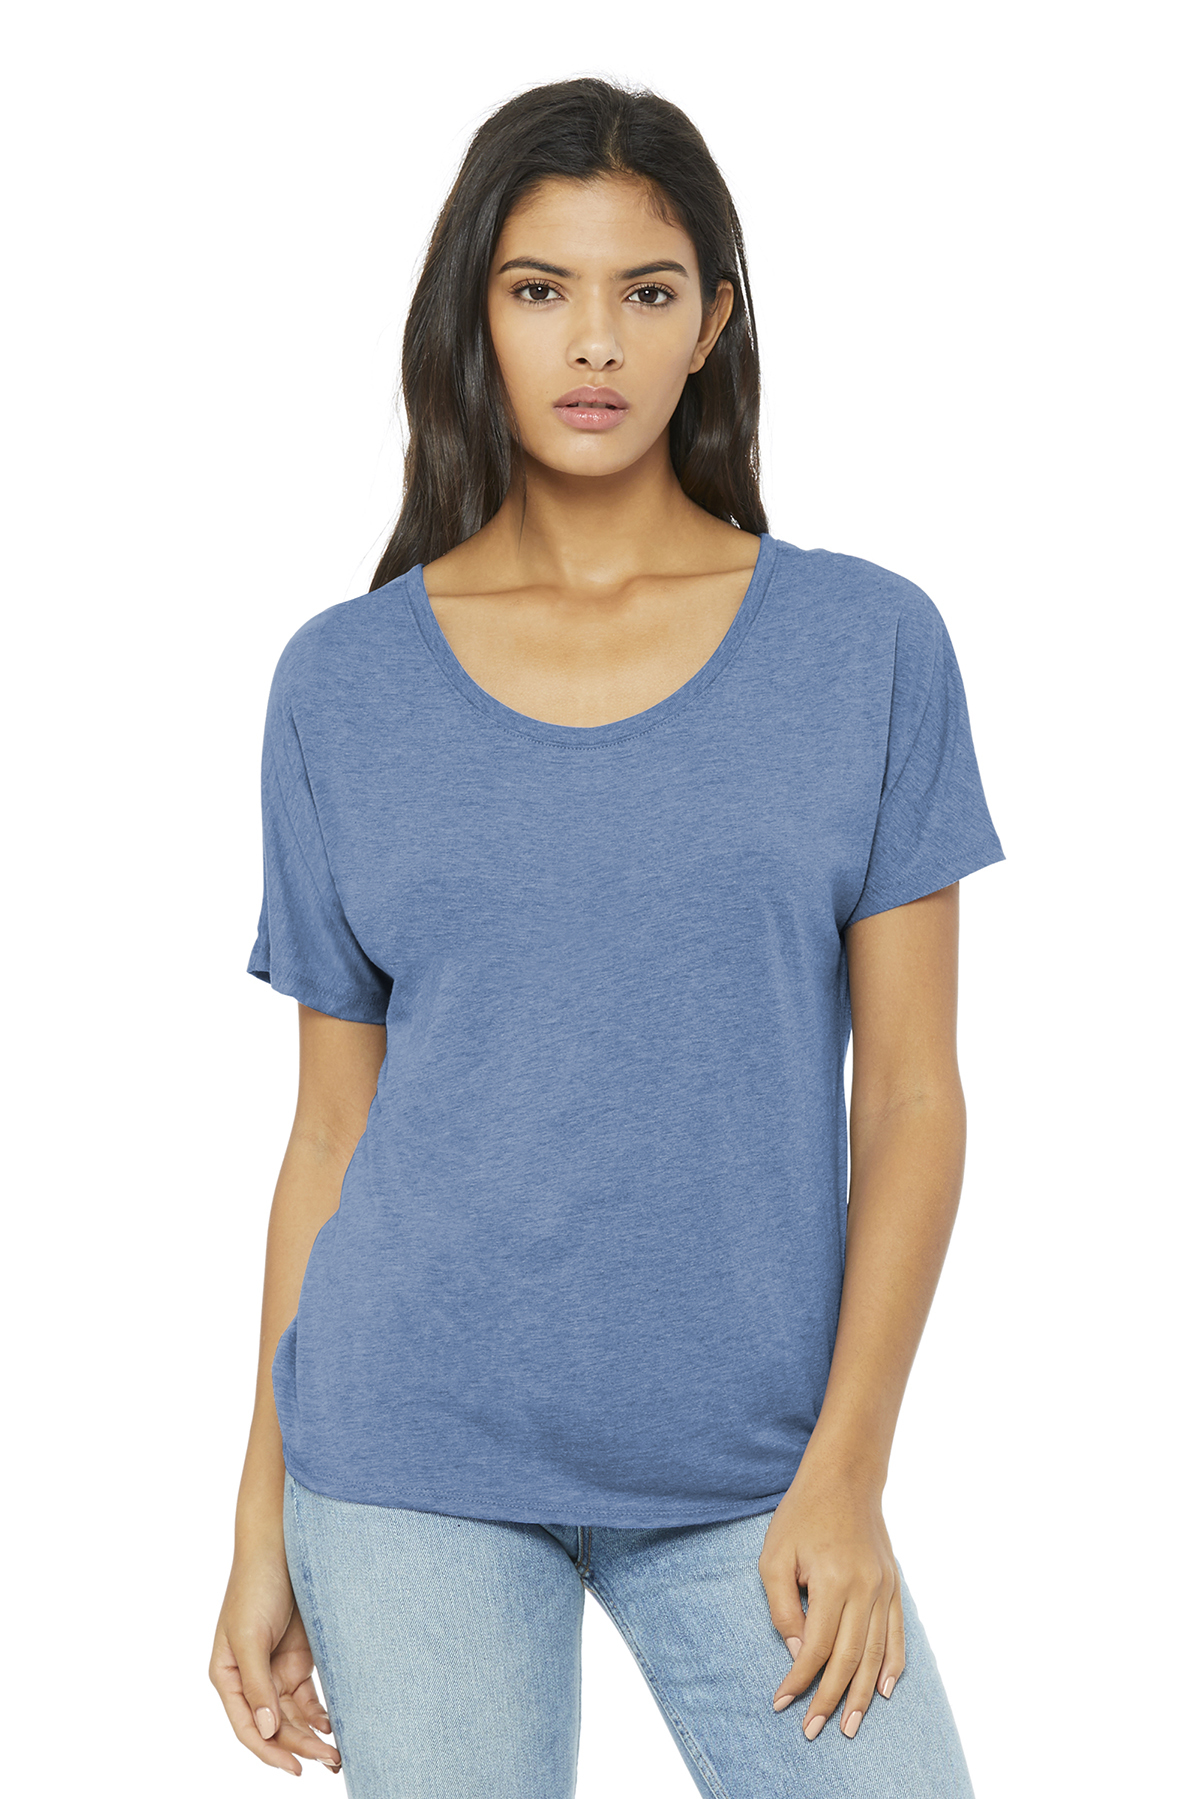 BELLA+CANVAS Women’s Slouchy Tee | Product | Company Casuals